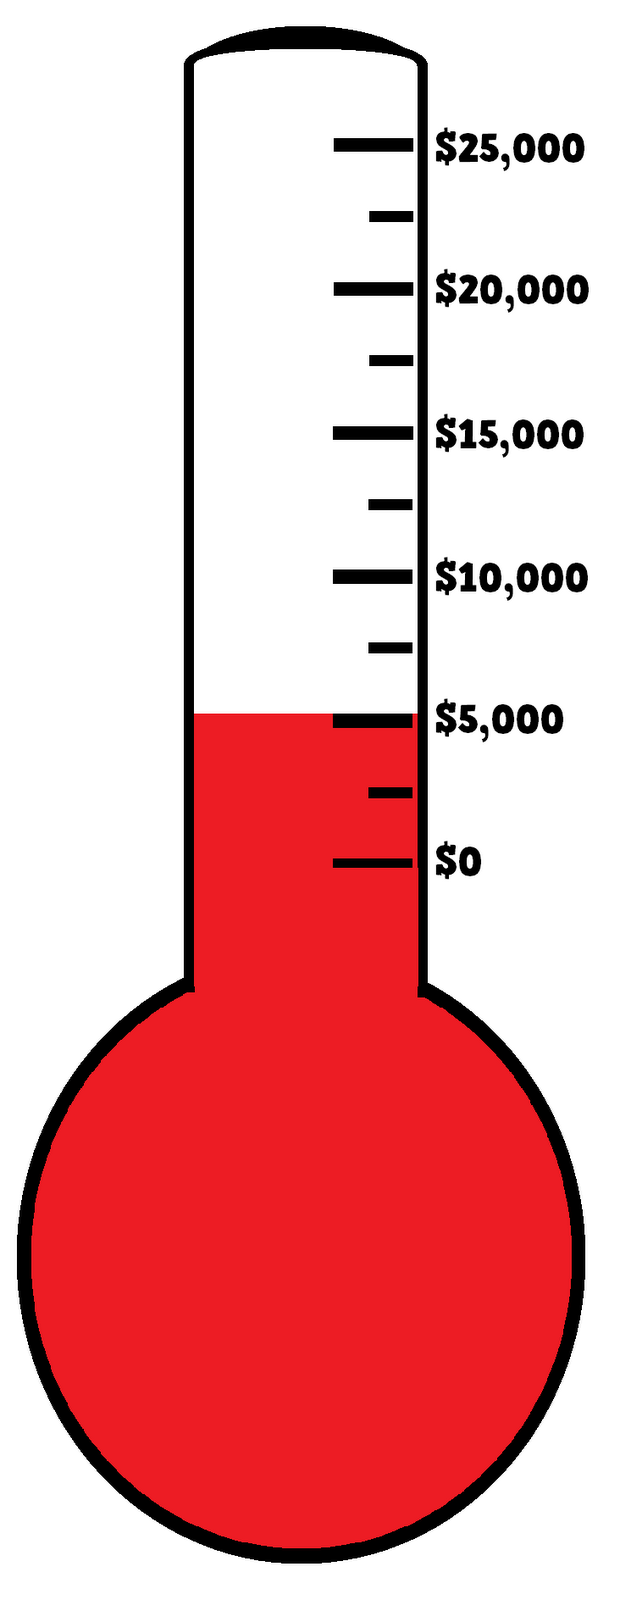 Free Blank Fundraising Thermometer Template Download Free Blank Fundraising Thermometer Template Png Images Free Cliparts On Clipart Library